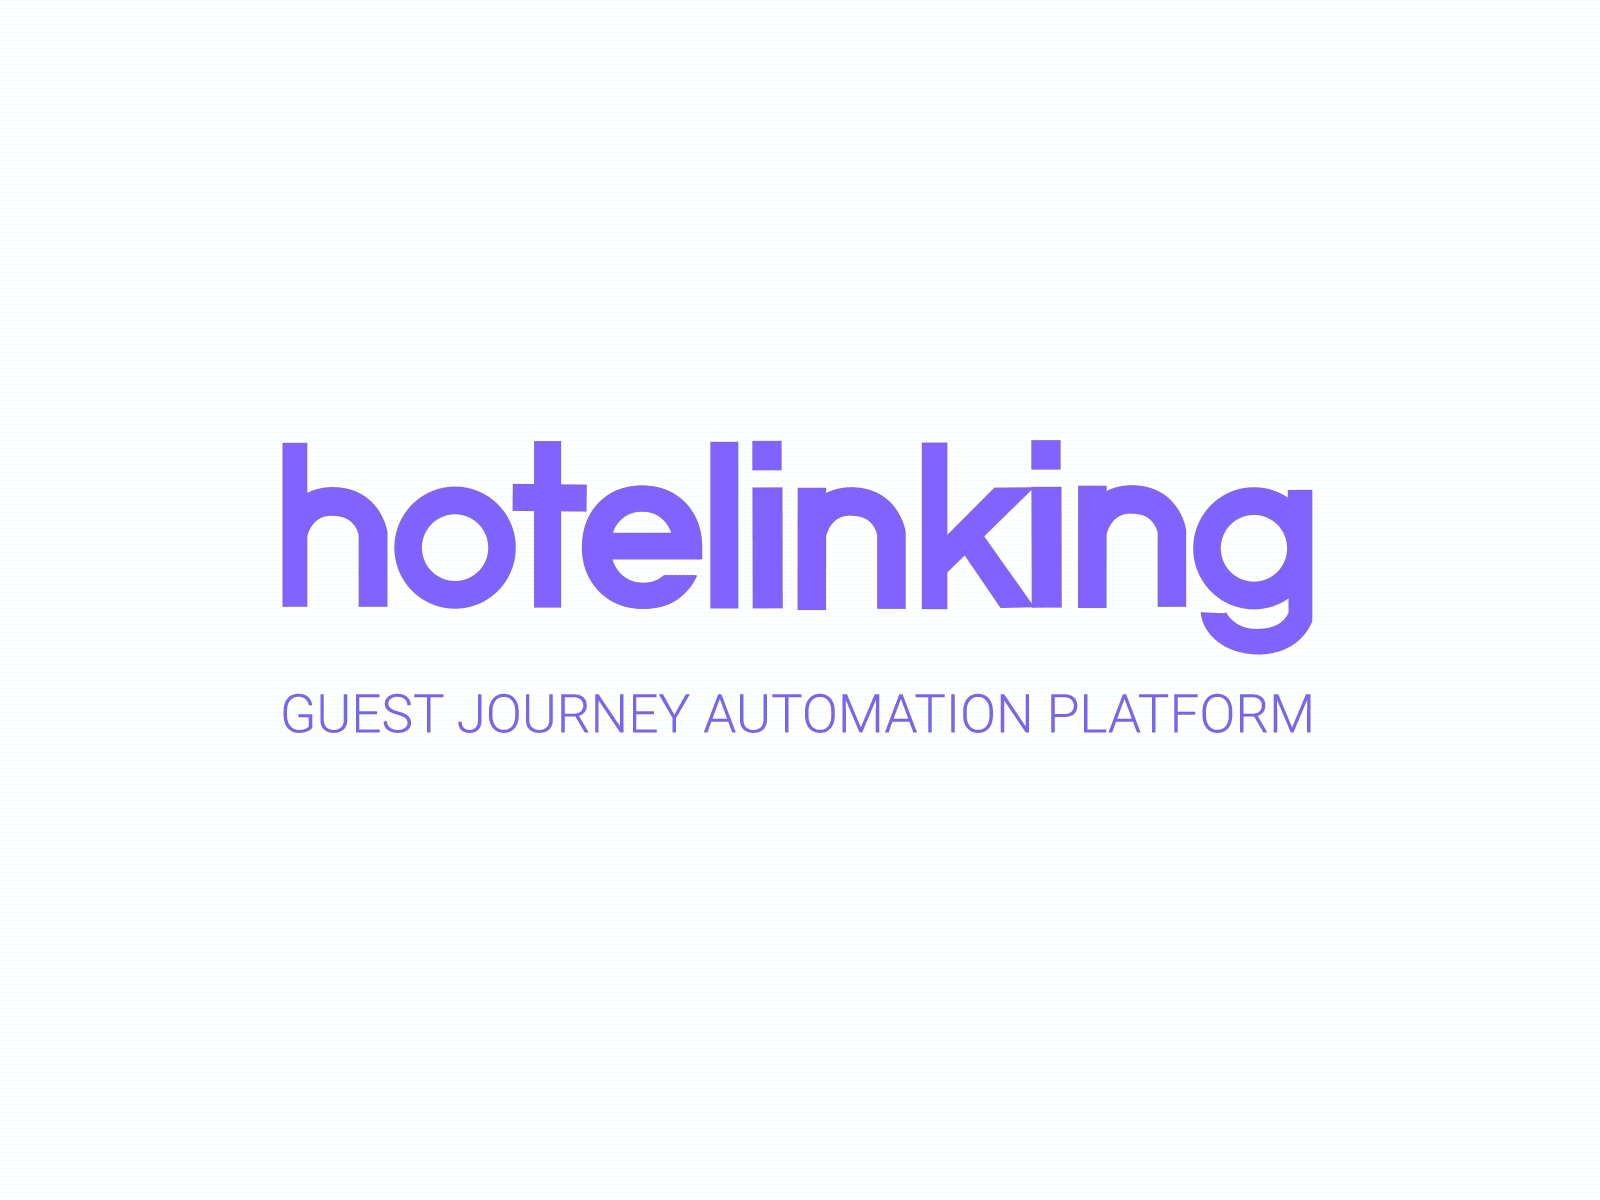 This is Hotelinking!